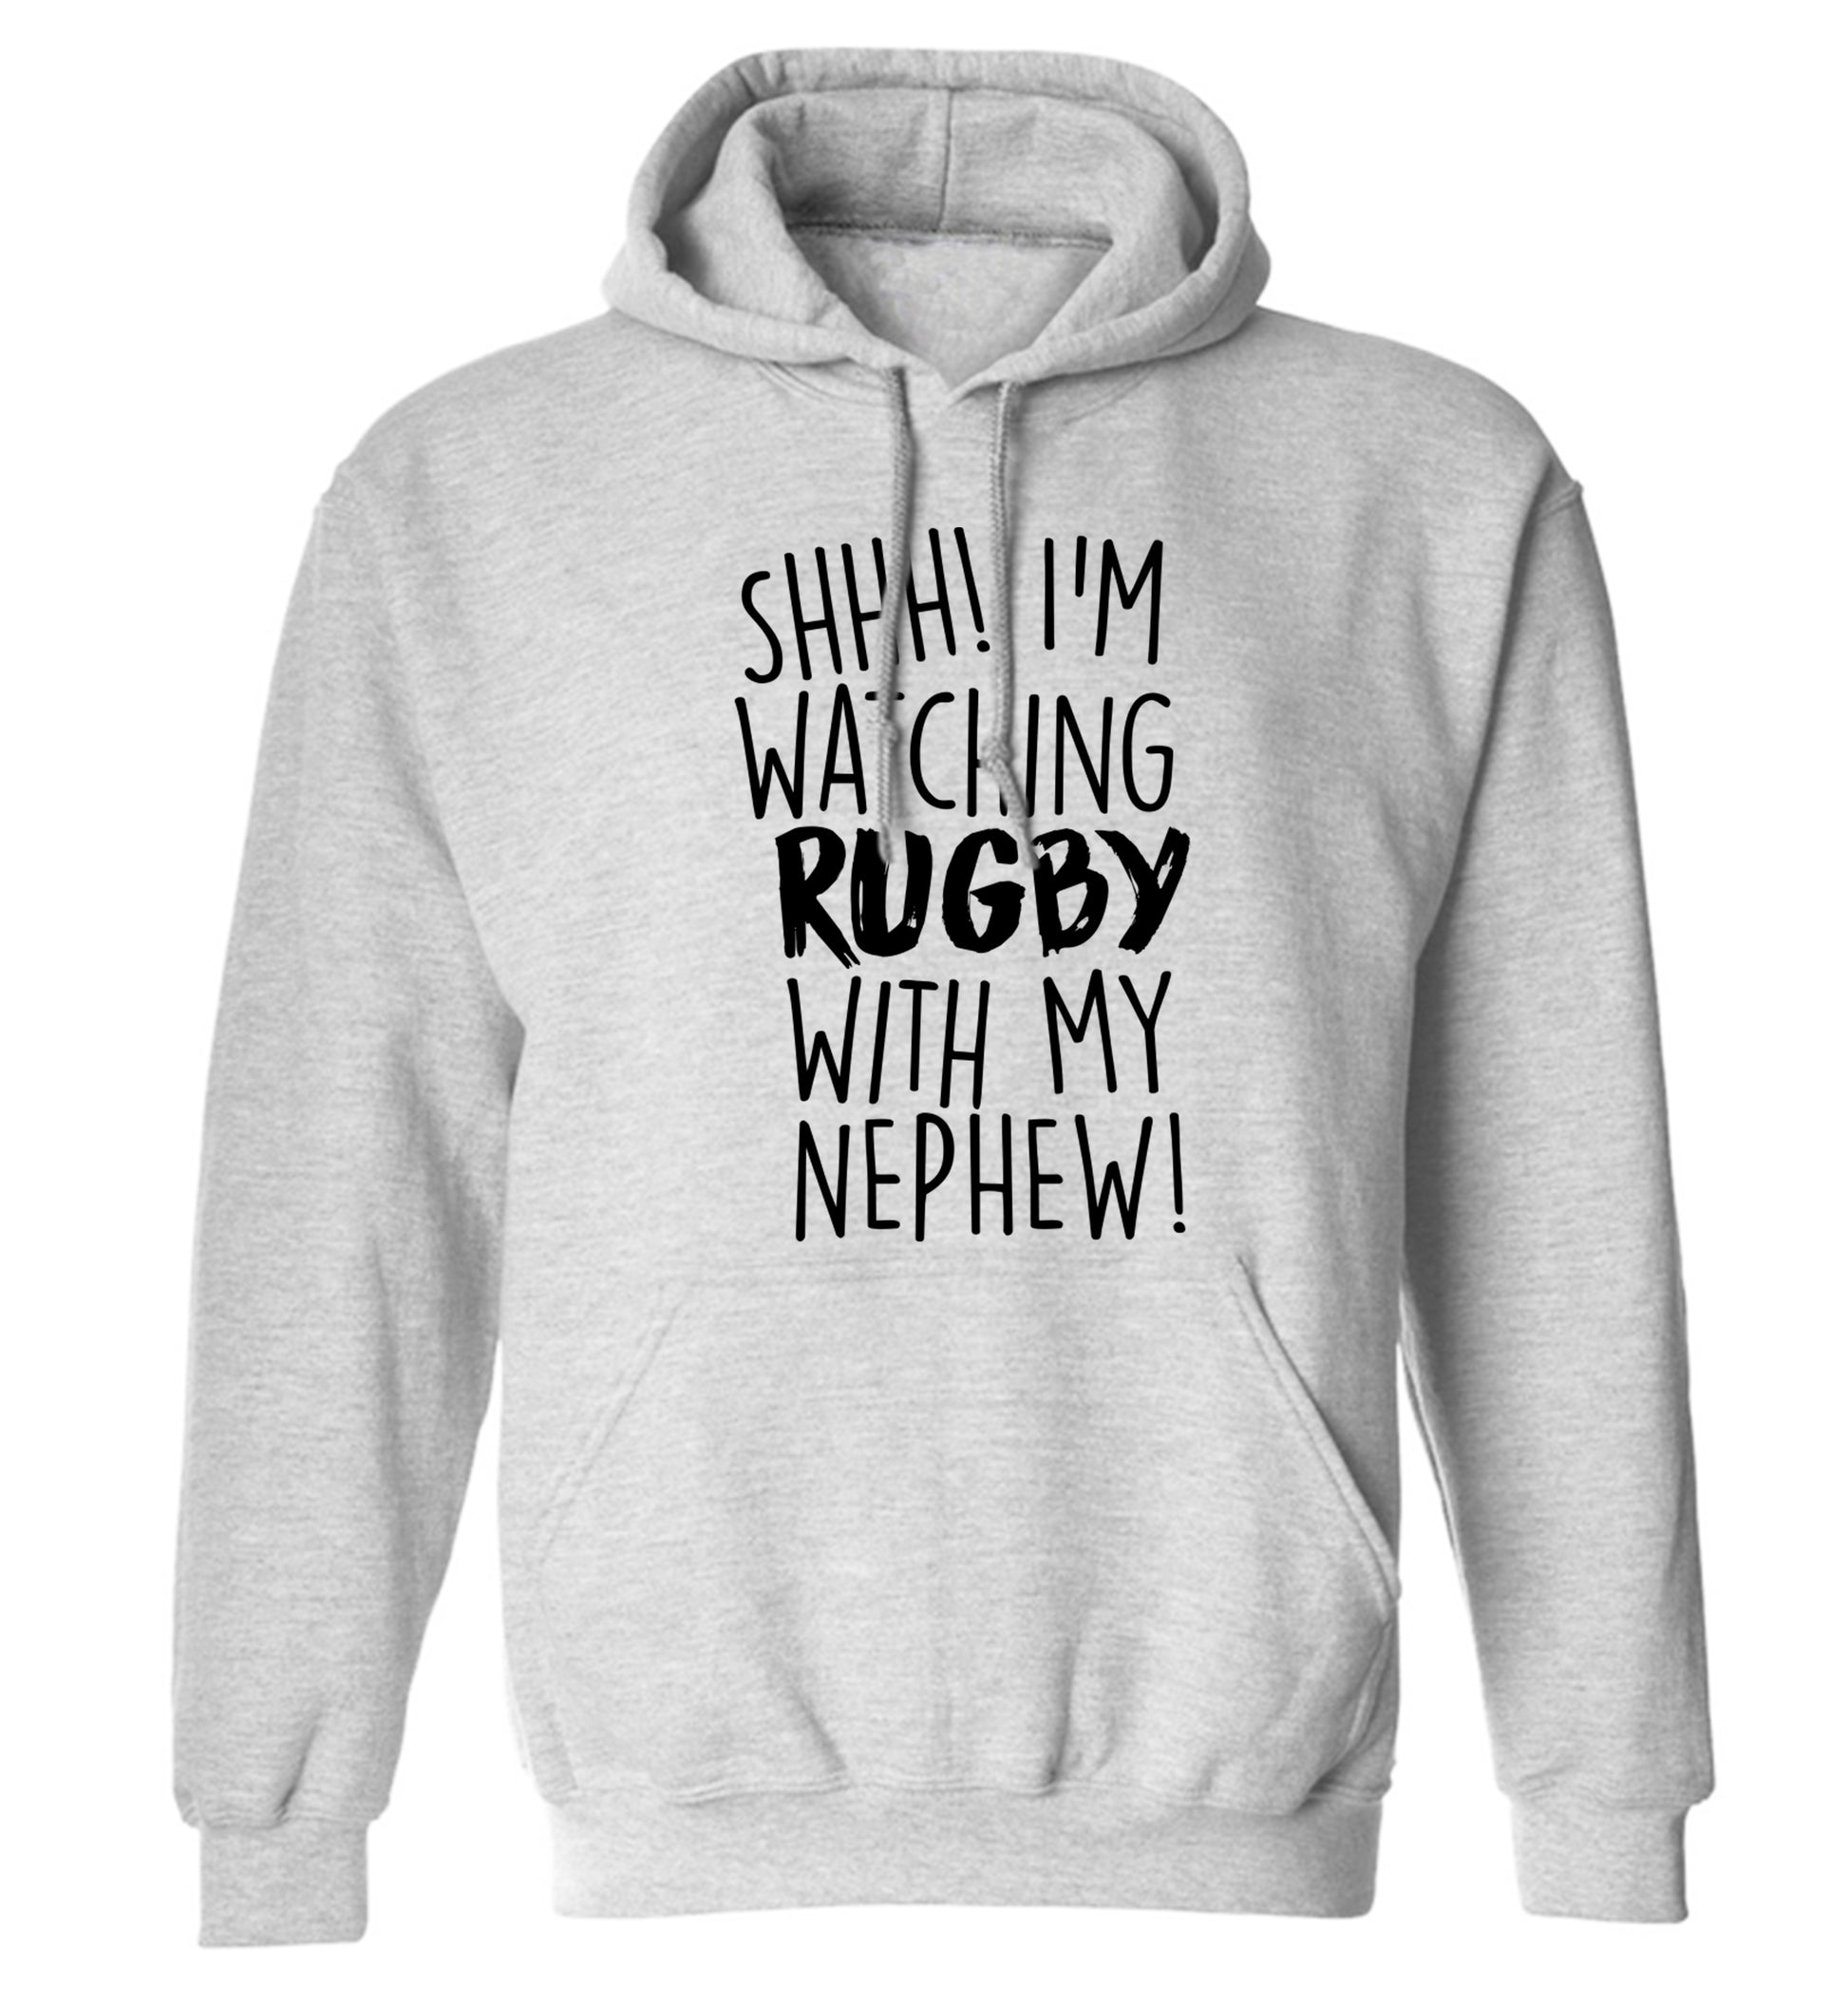 Shh.. I'm watching rugby with my nephew adults unisex grey hoodie 2XL